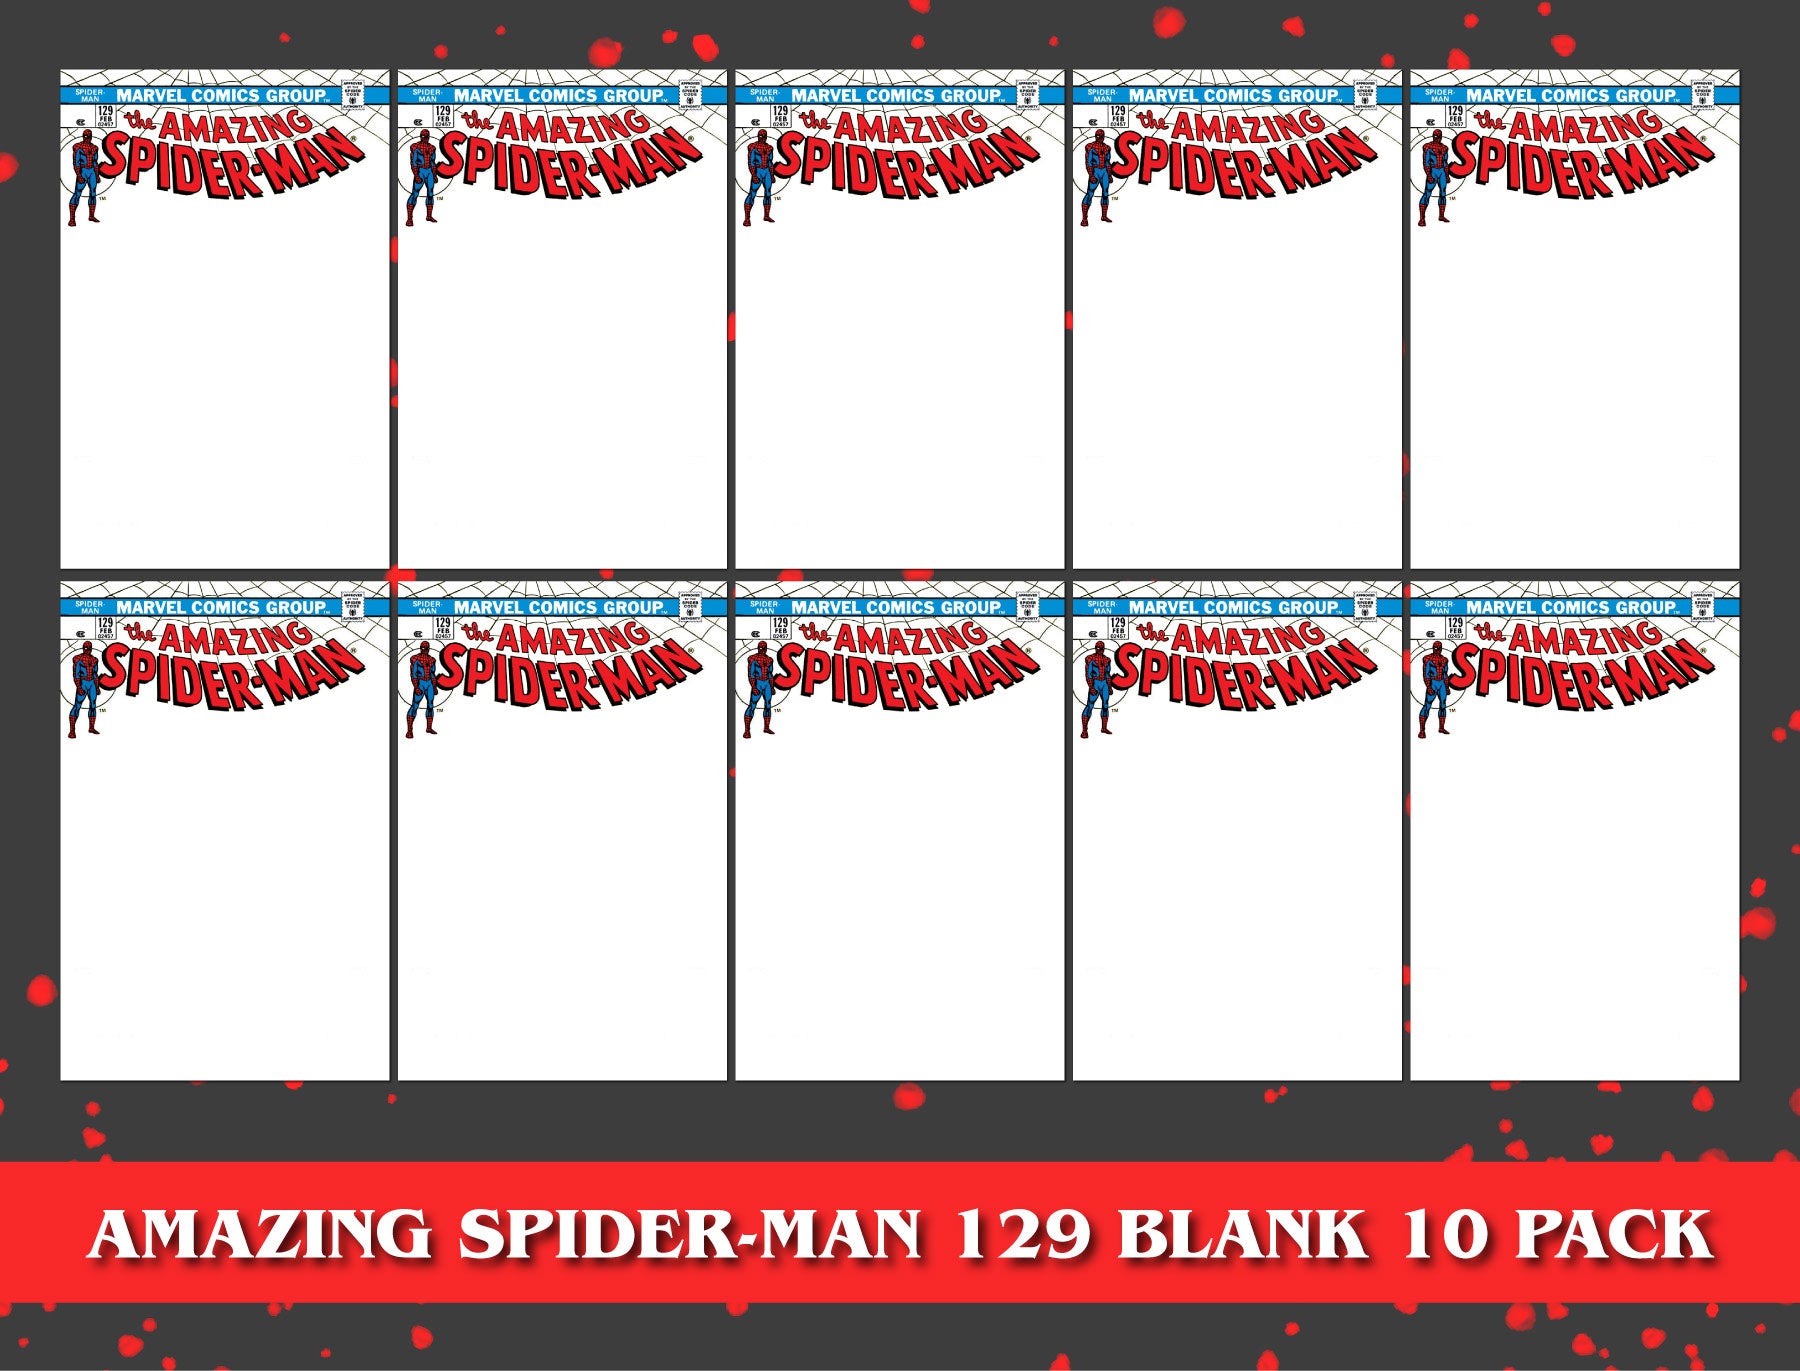 [10 PACK] AMAZING SPIDER-MAN 129 UNKNOWN COMICS FACSIMILE EDITION EXCLUSIVE BLANK VAR (02/22/2023)